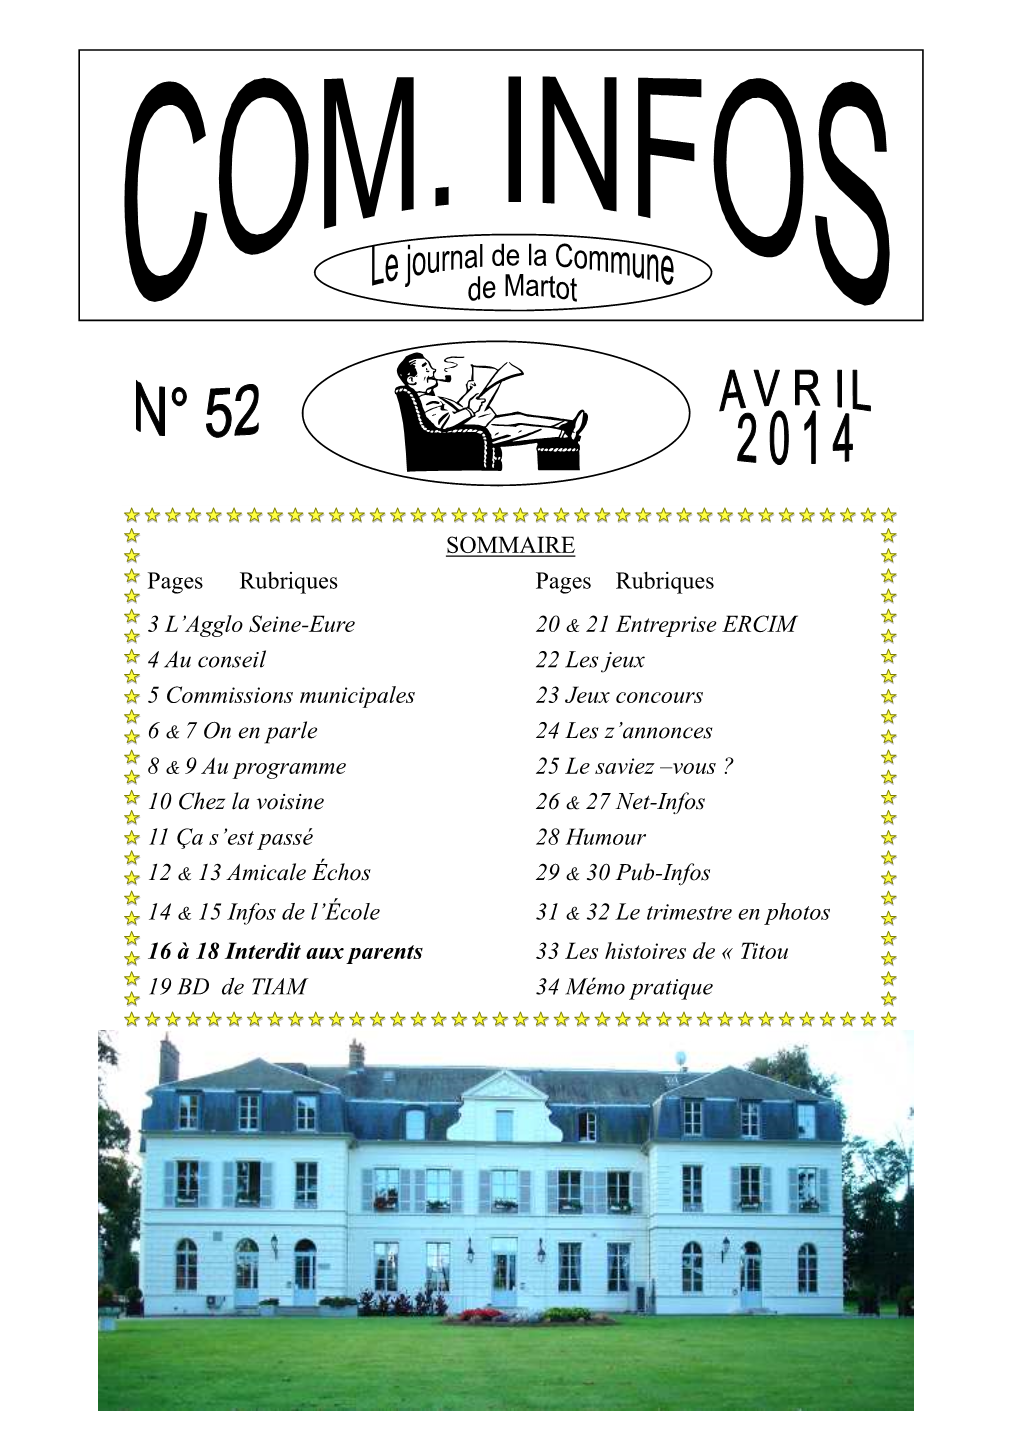 Com-Infos N° 52 Avril 2014 (34 Pages)